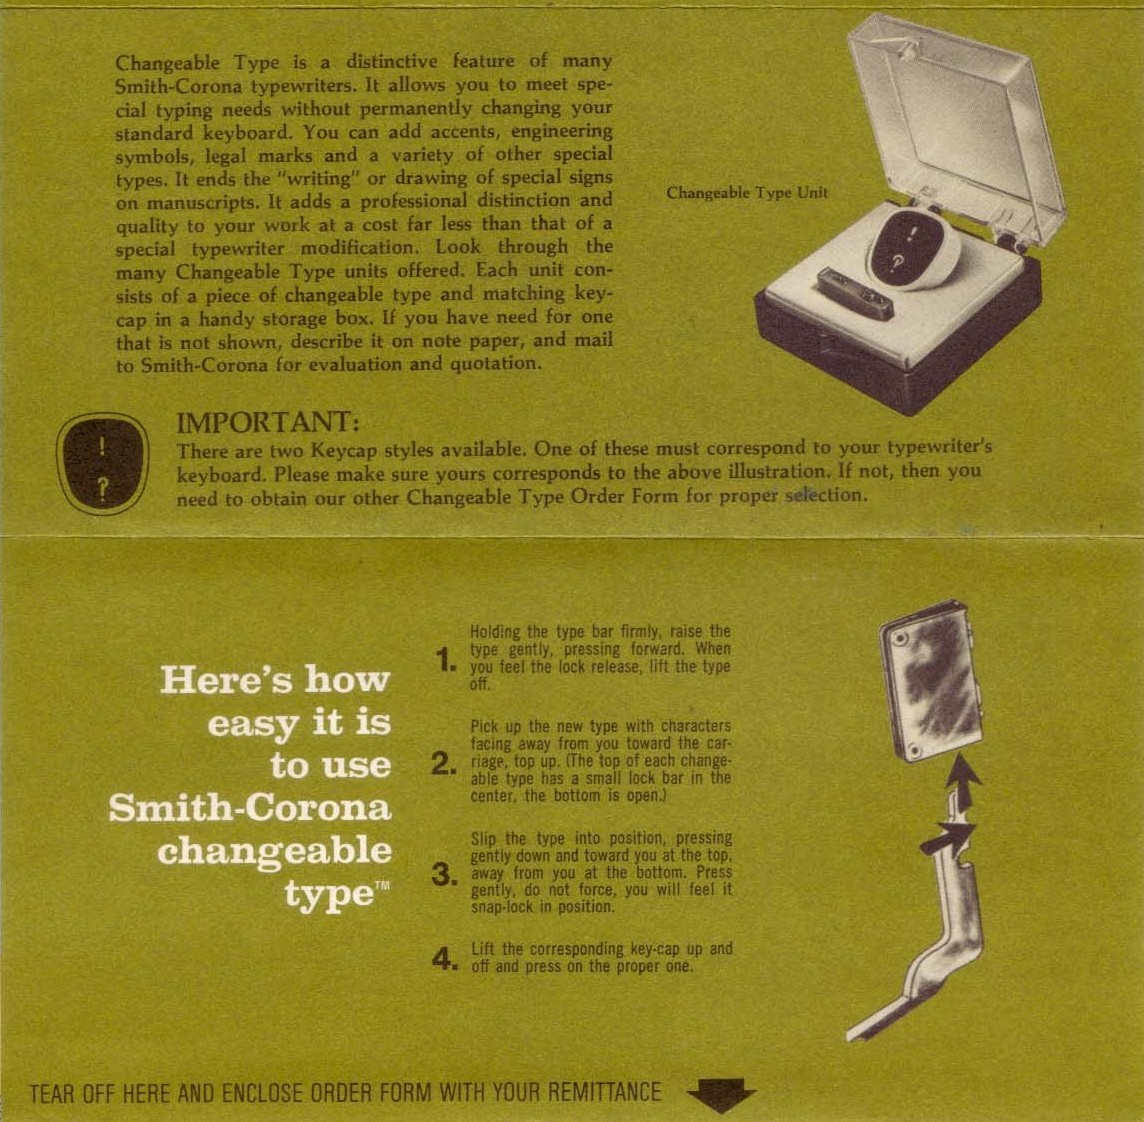 A 1969 brochure from Smith-Corona showing their interchangeable interrobang key.